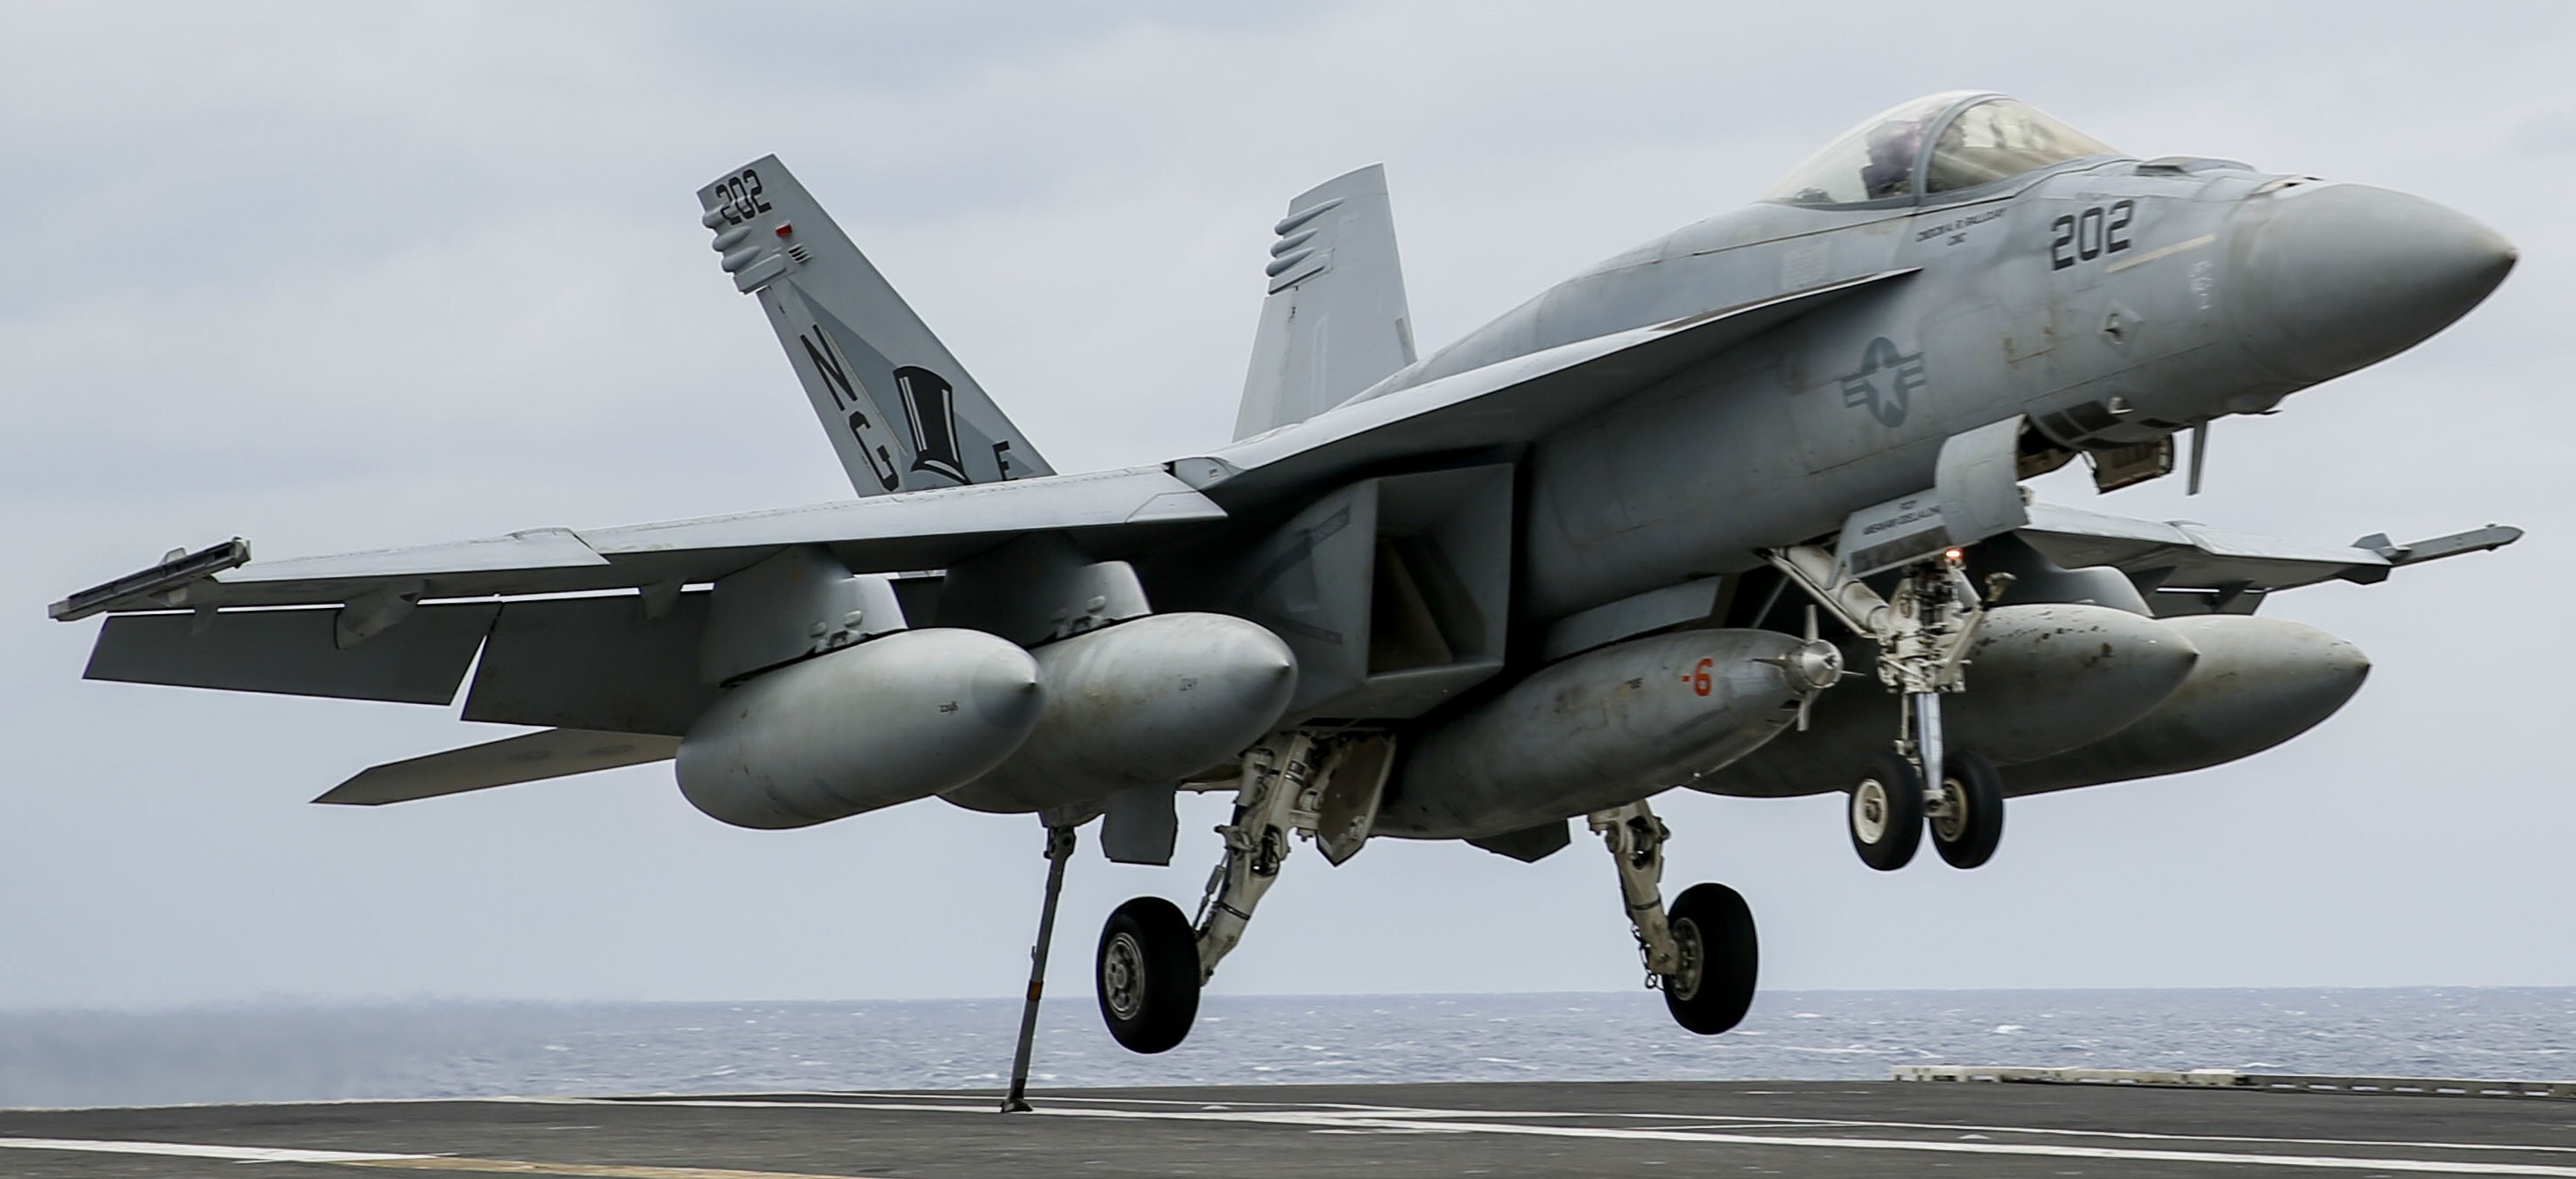 vfa-14 tophatters strike fighter squadron f/a-18e super hornet cvn-72 uss abraham lincoln cvw-9 us navy 62